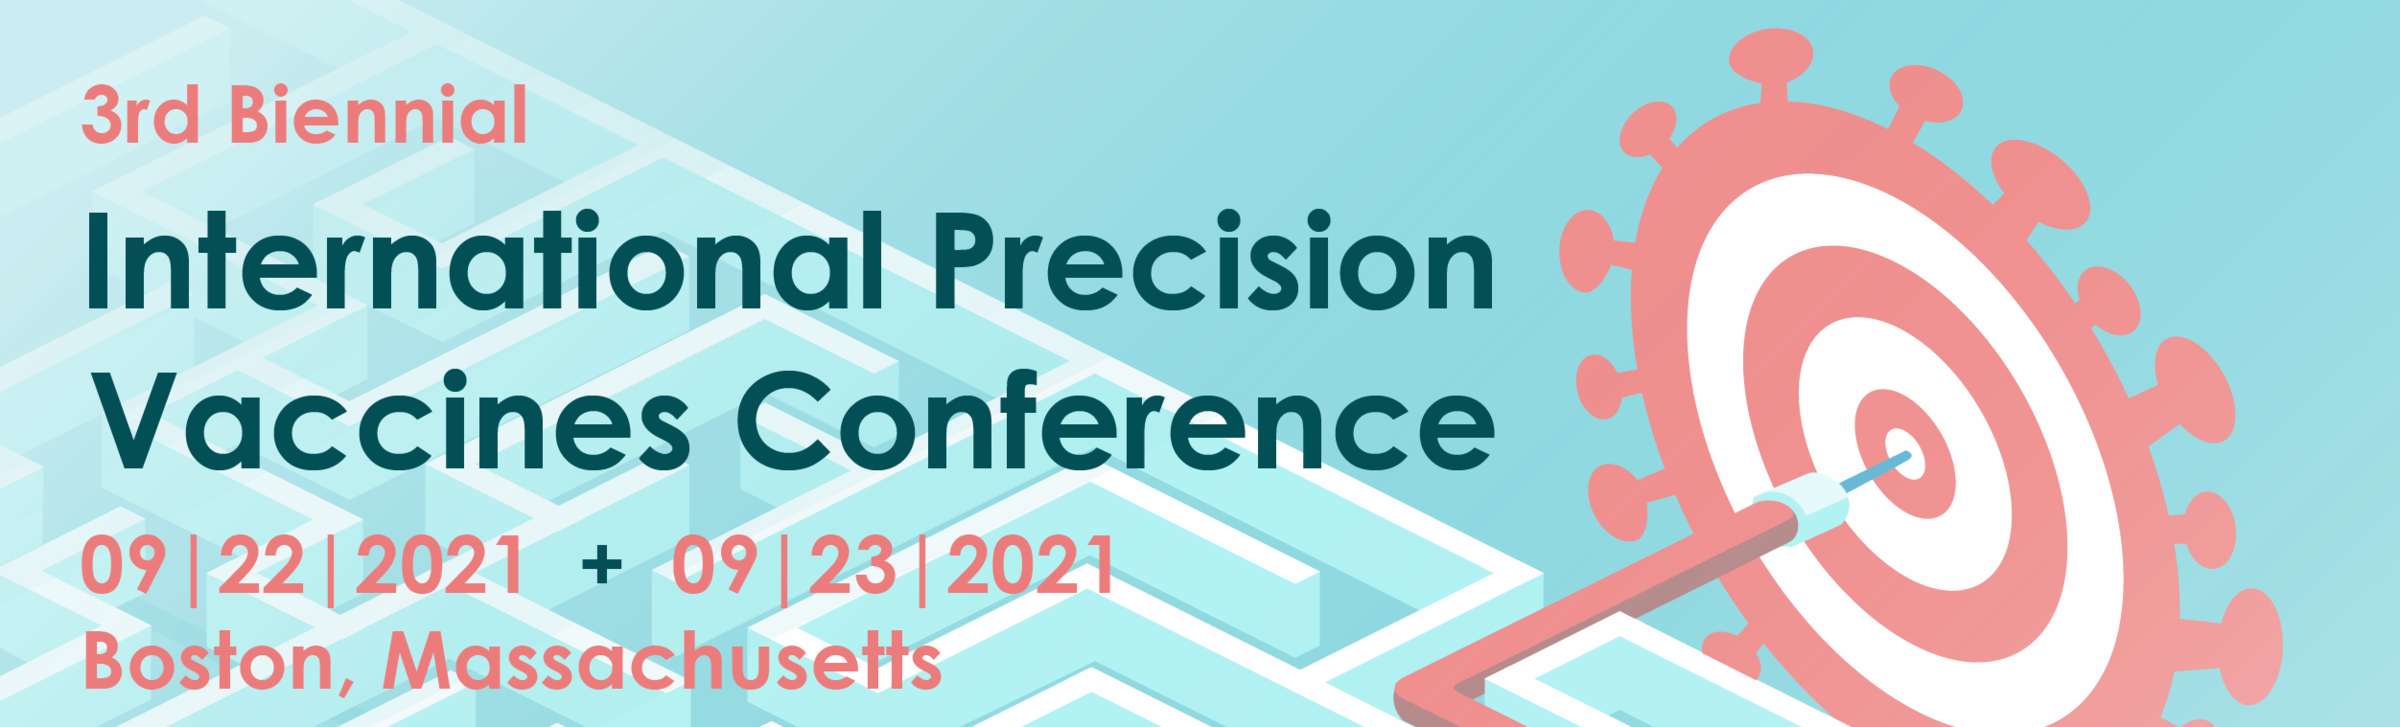 2021 International Precision Vaccines Conference